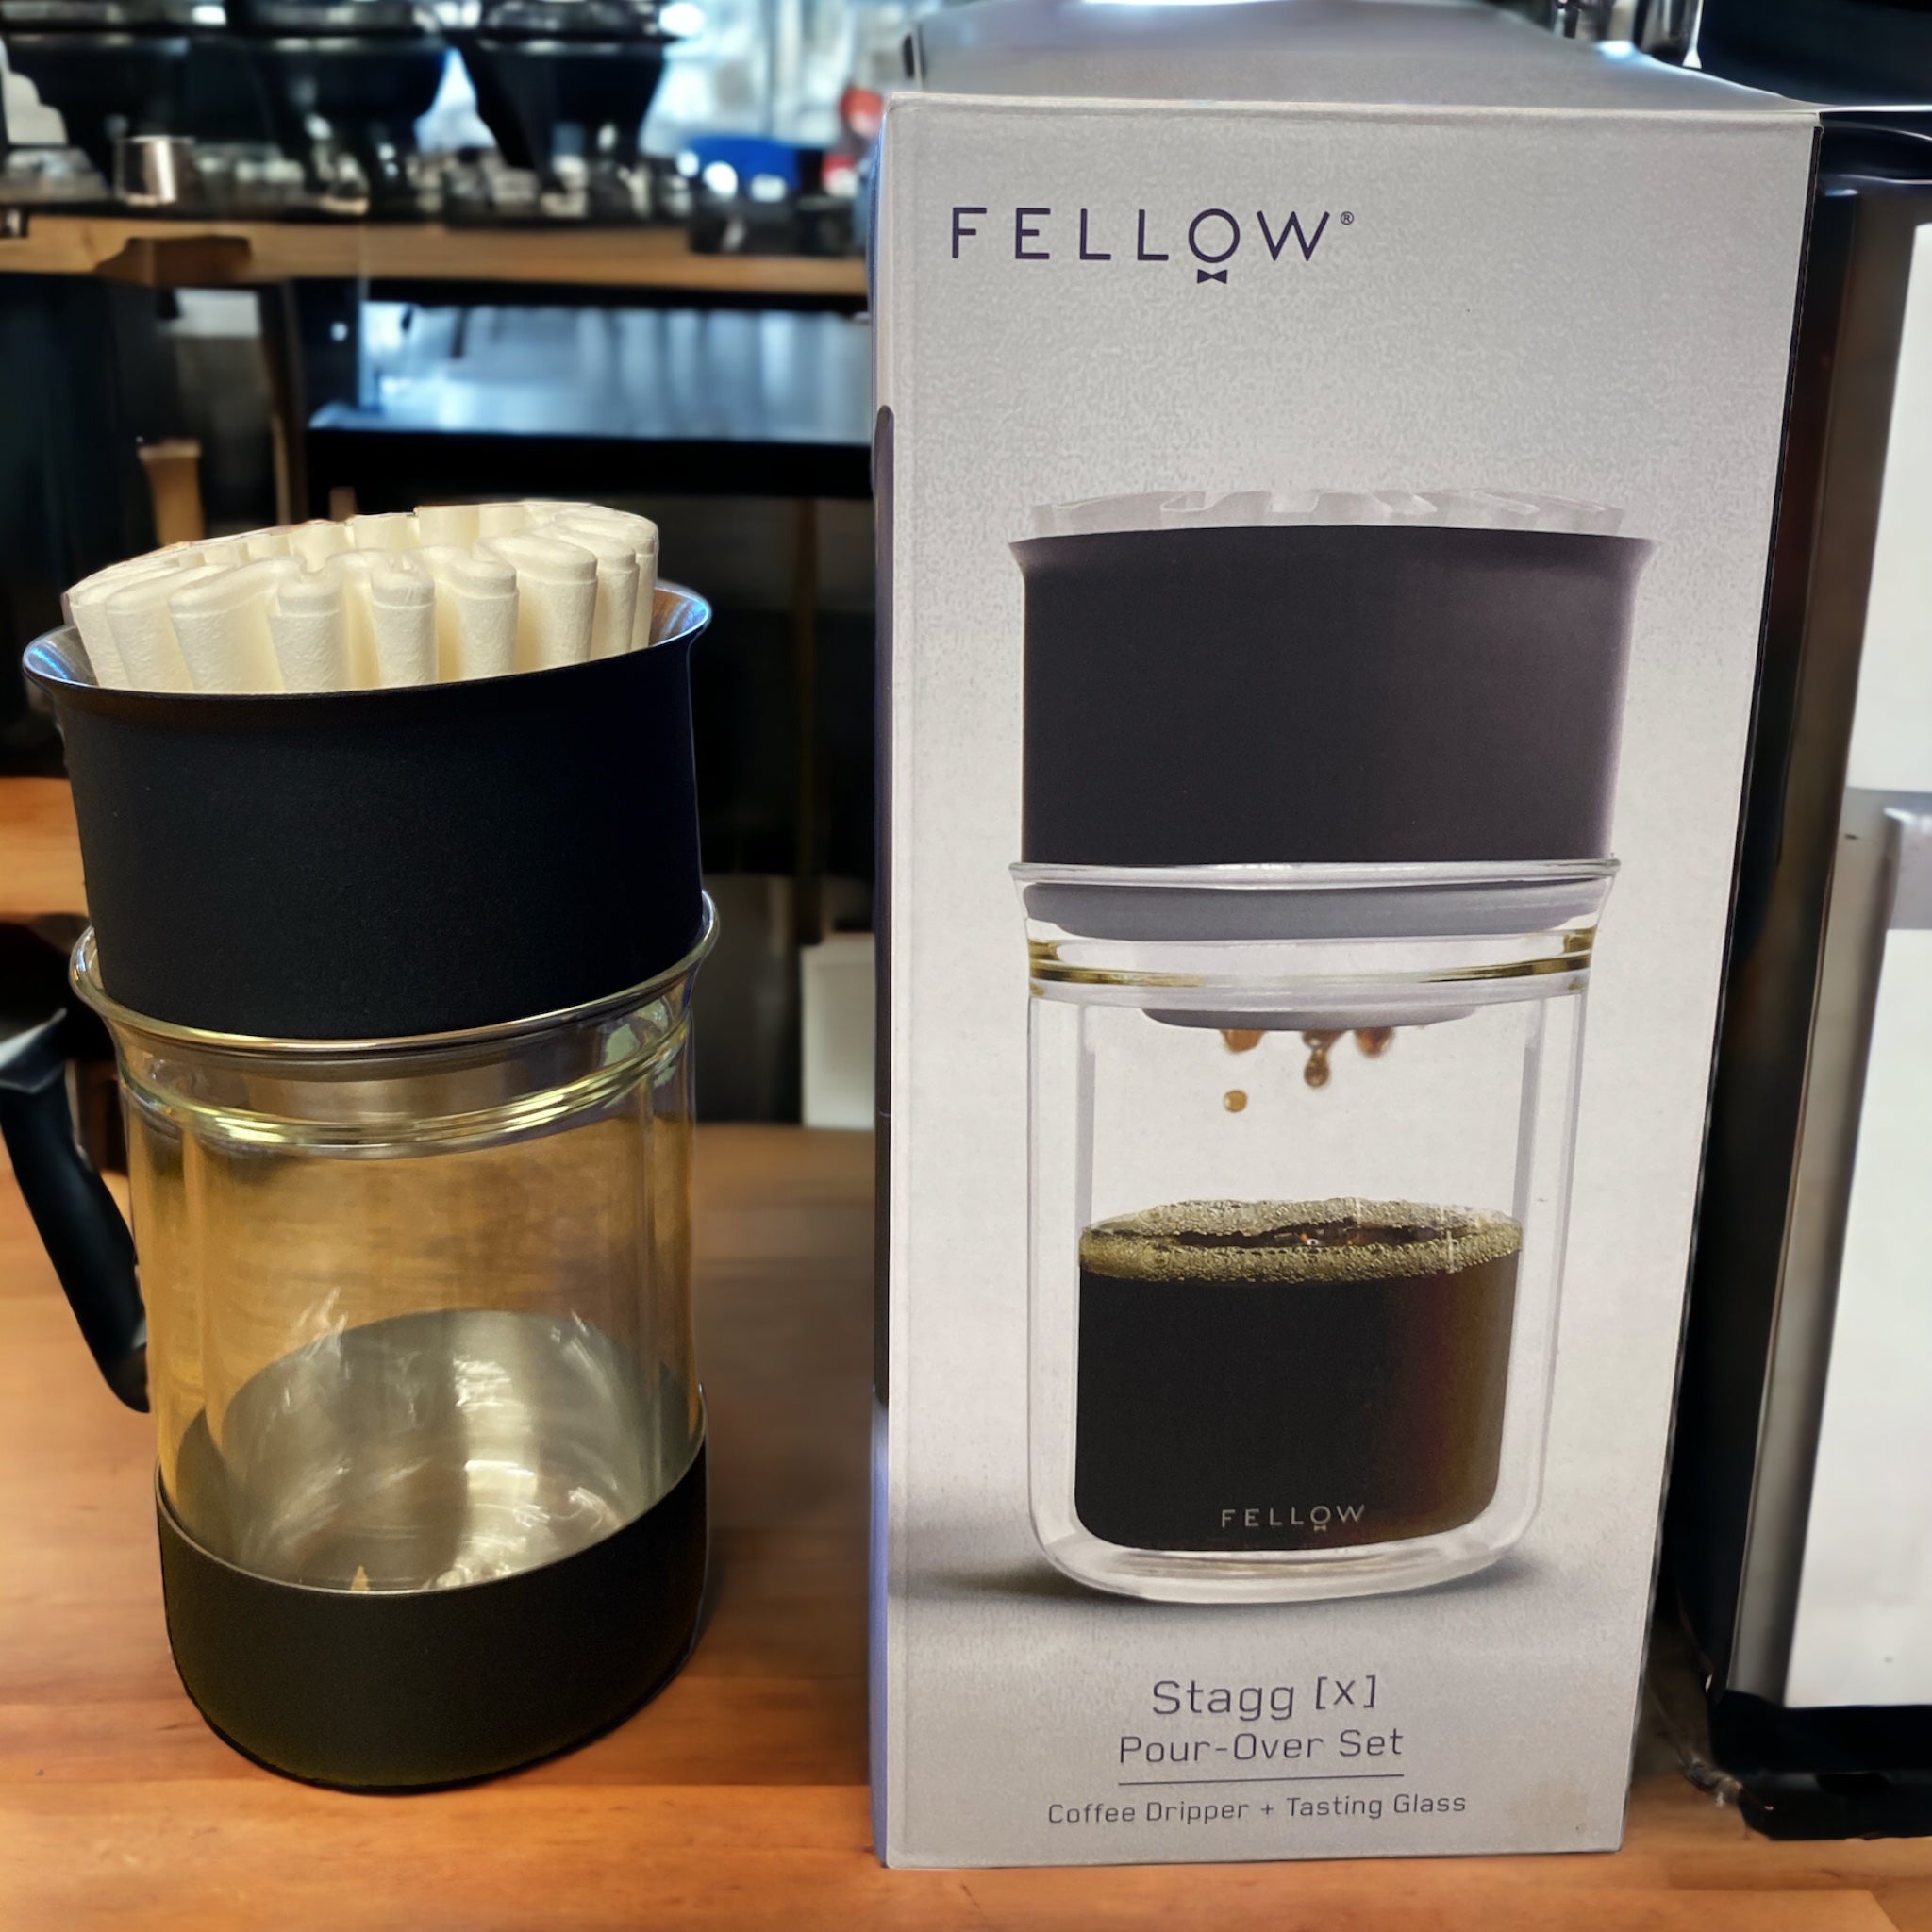 The Fellow Stagg [X] Pourover Set